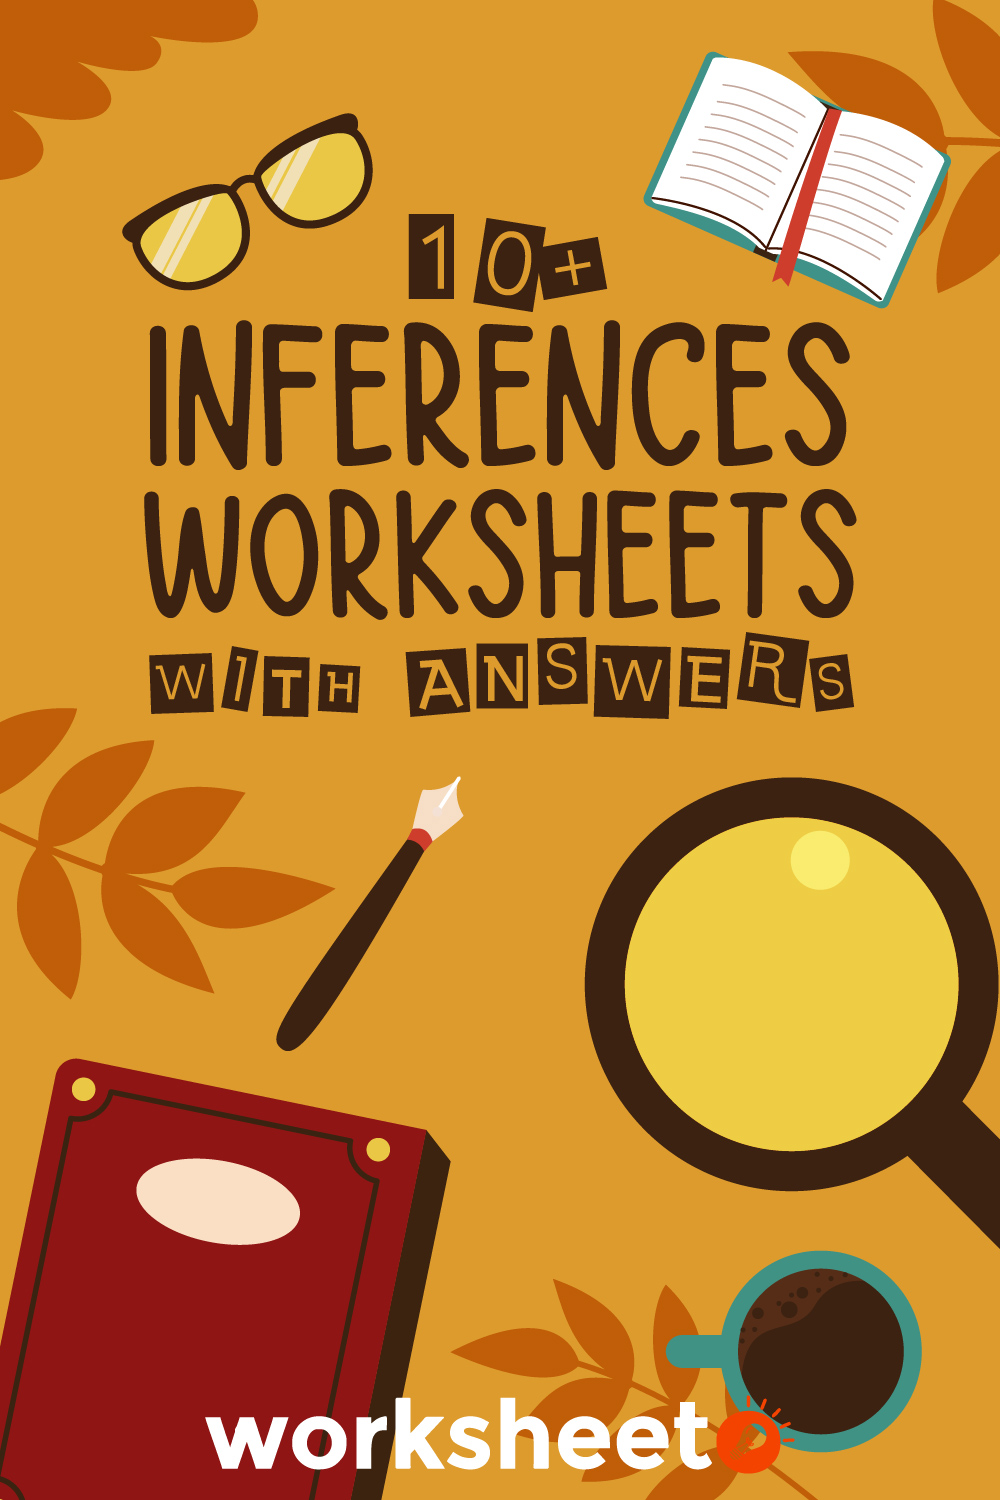 Inferences Worksheets with Answers